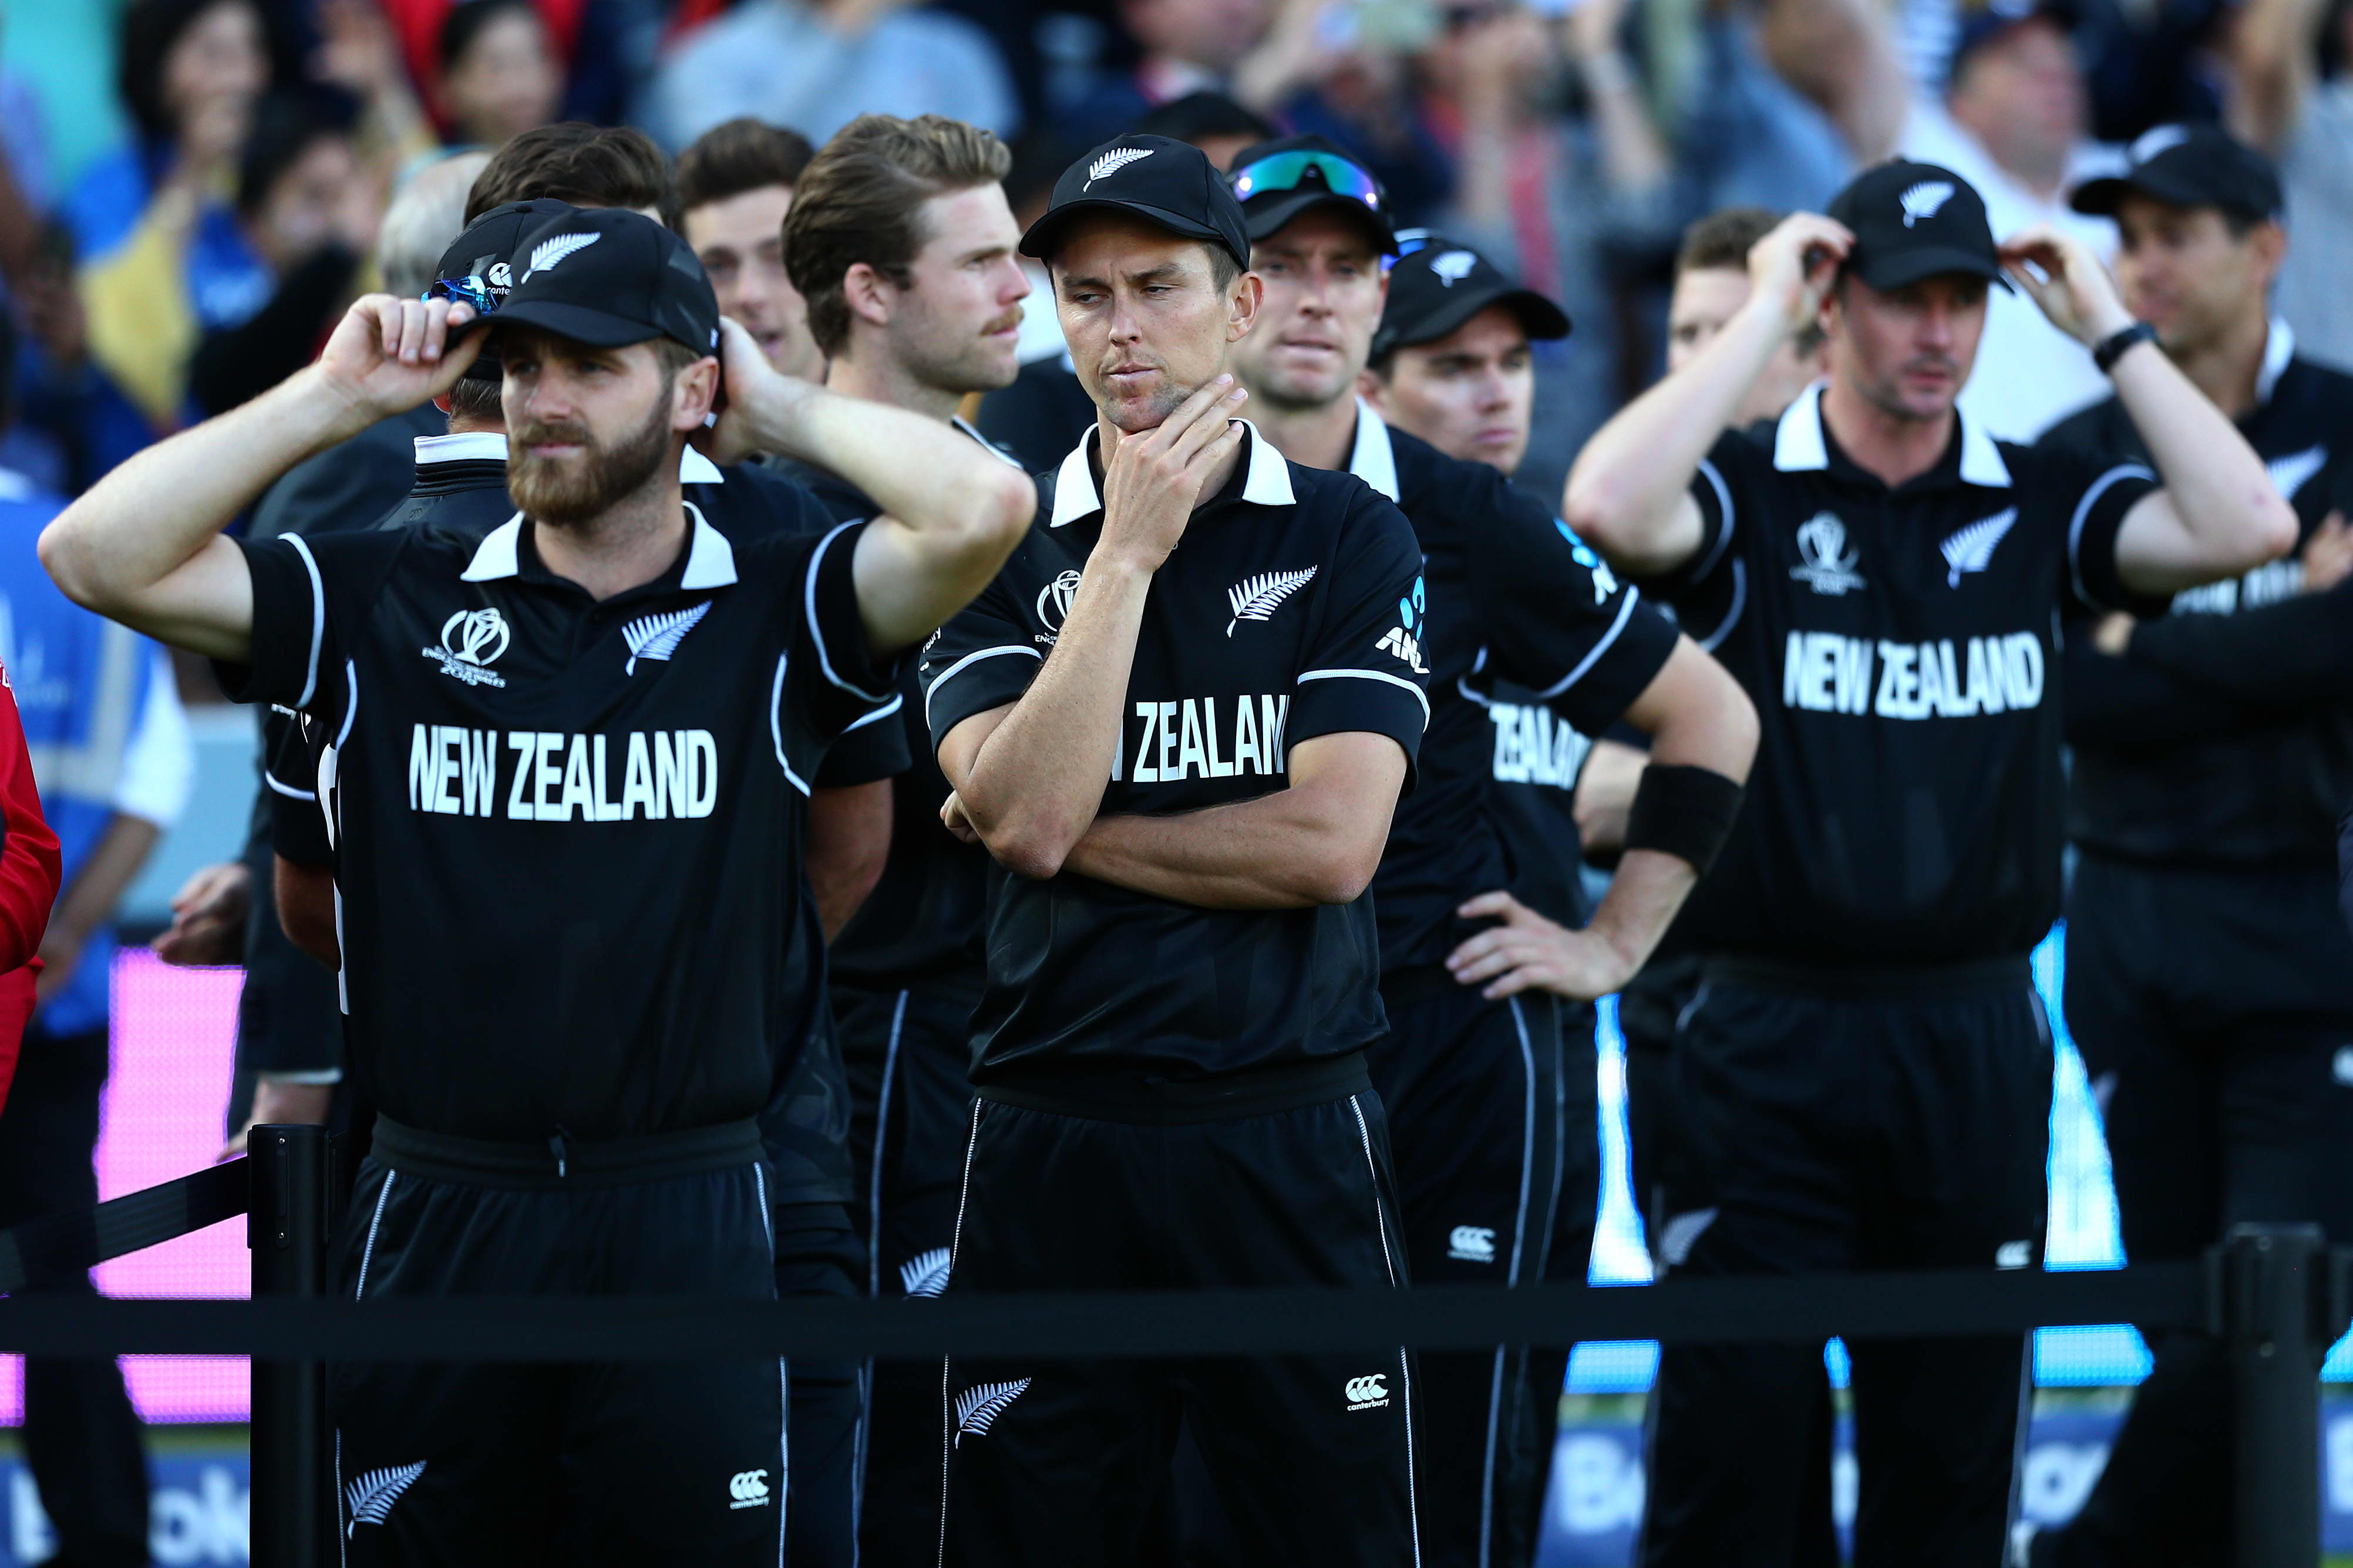 New Zealand fans agonize after defeat in Cricket world cup final